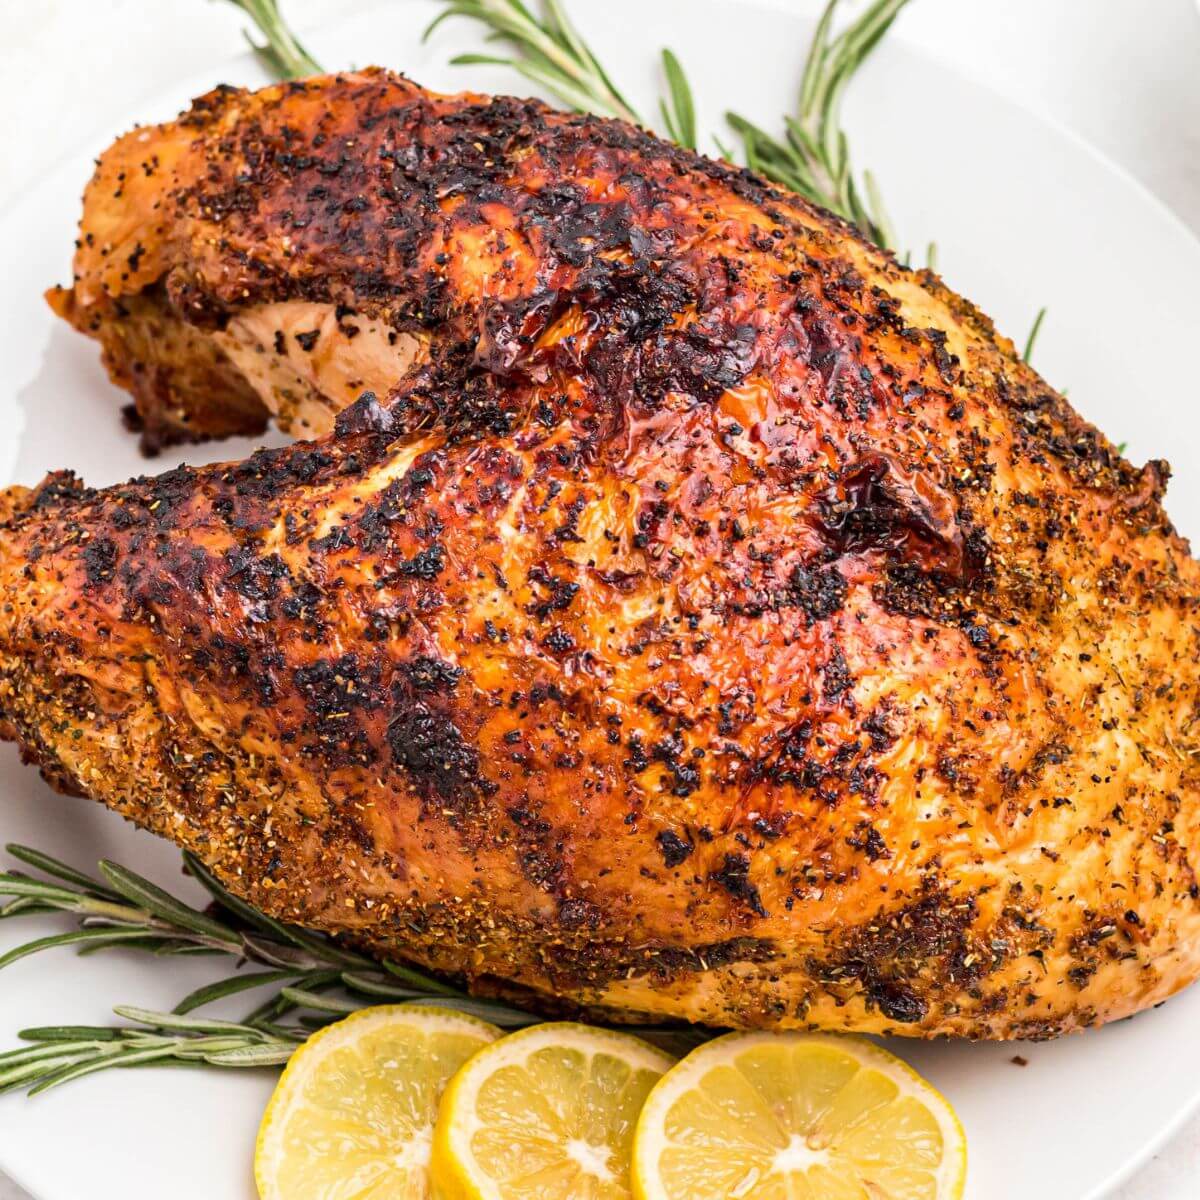 Air Fryer Turkey Breast - holiday main course packed full of flavor!